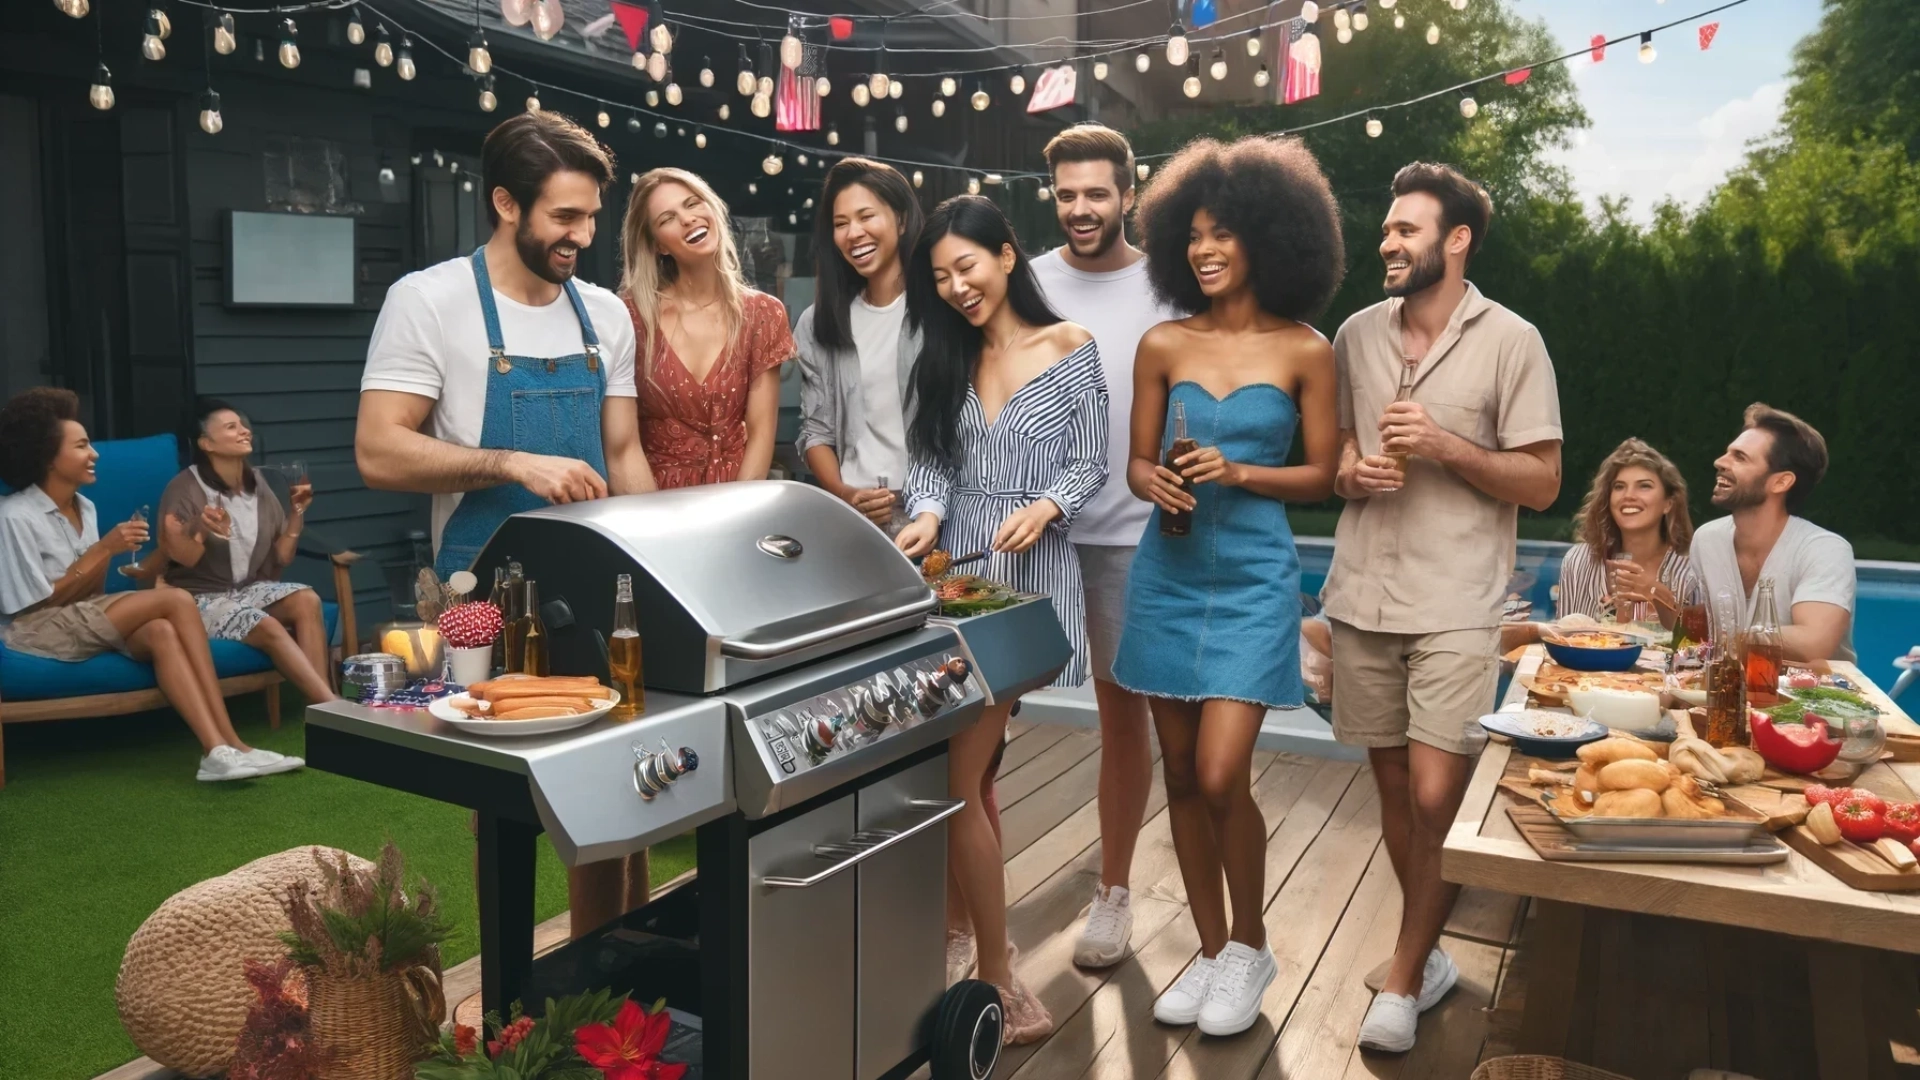 Joyful moments and great grilling! Friends gather to celebrate the 4th of July with a backyard barbecue, enjoying each other's company in a festive setting.